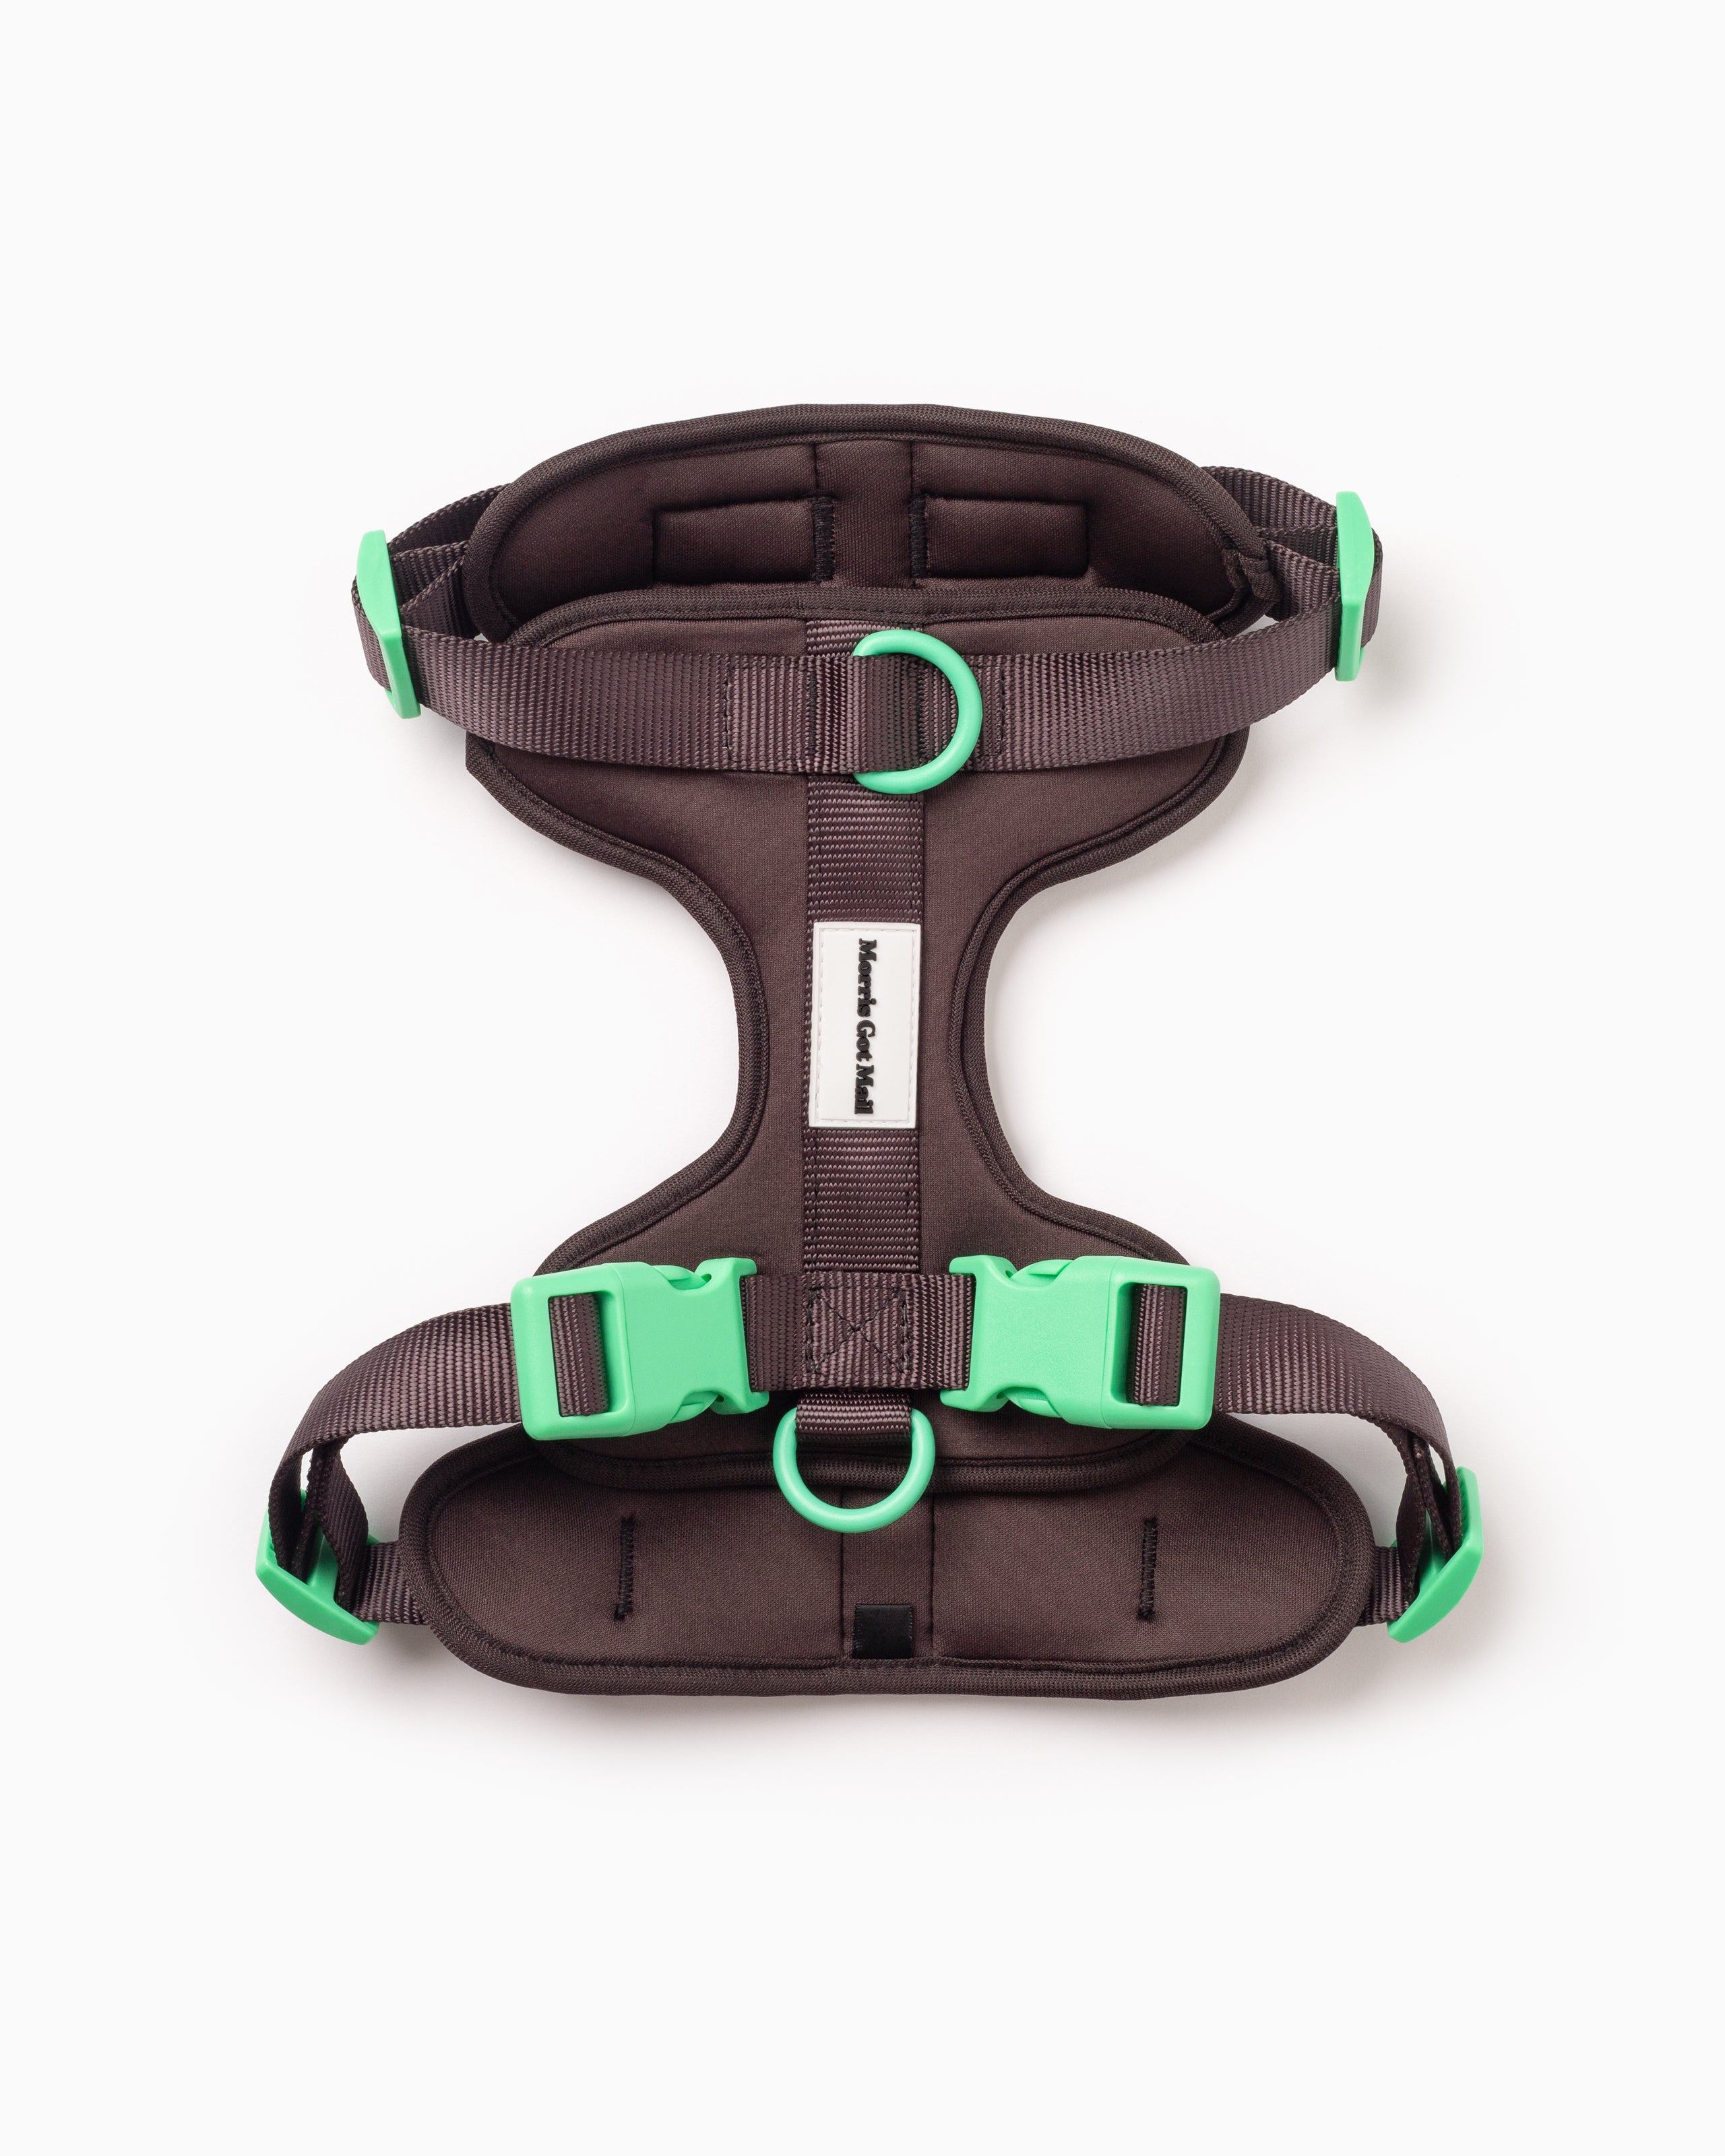 Dark brown lightweight two tone dog harness with three d-ring attachments & high quality buckles.